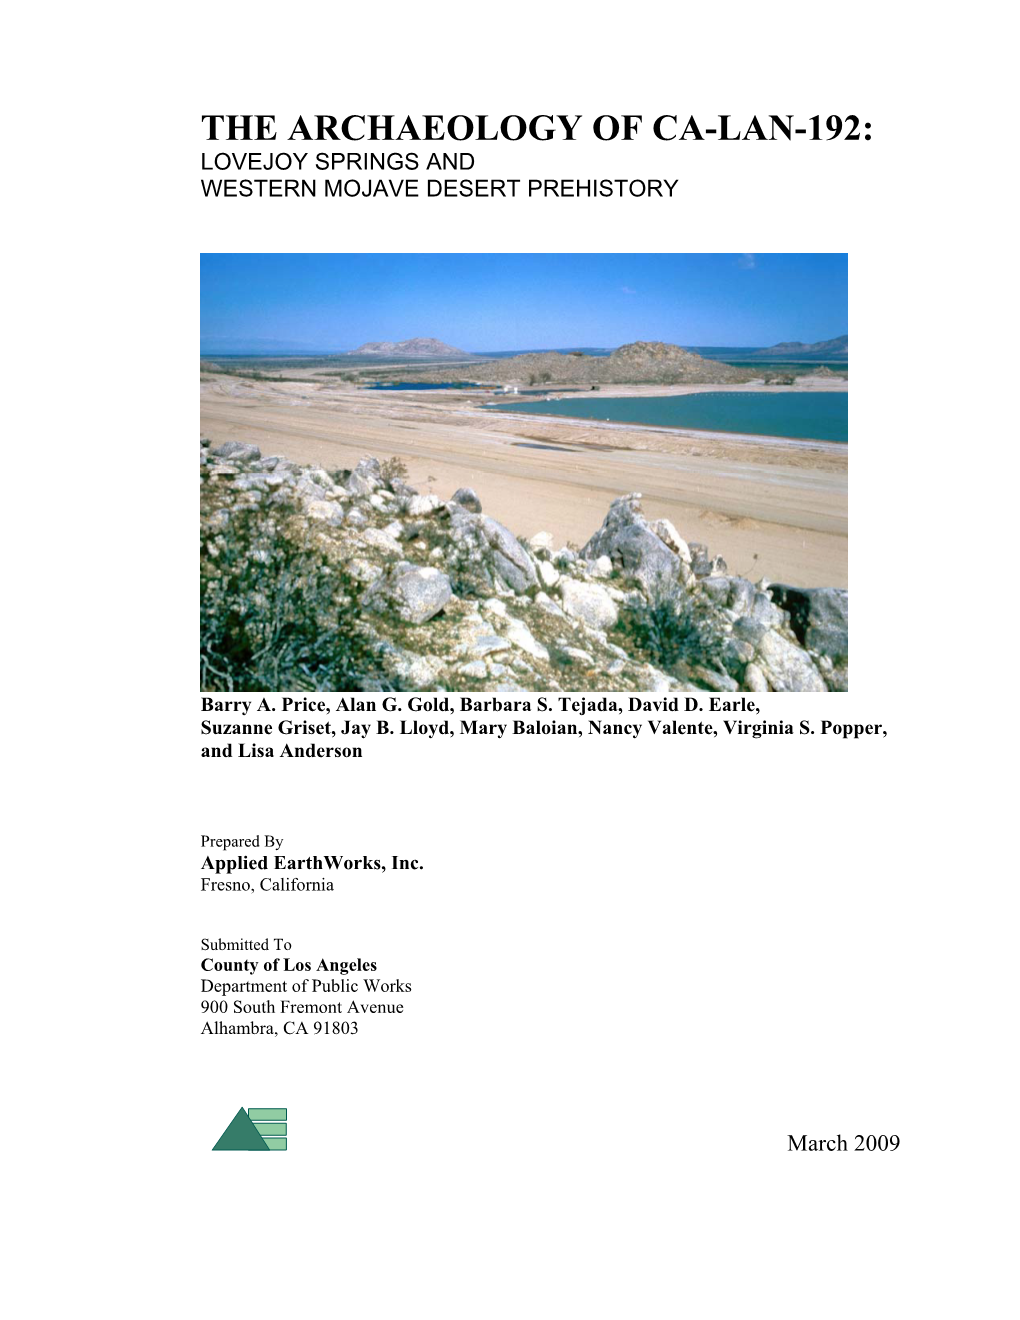 The Archaeology of Ca-Lan-192: Lovejoy Springs and Western Mojave Desert Prehistory